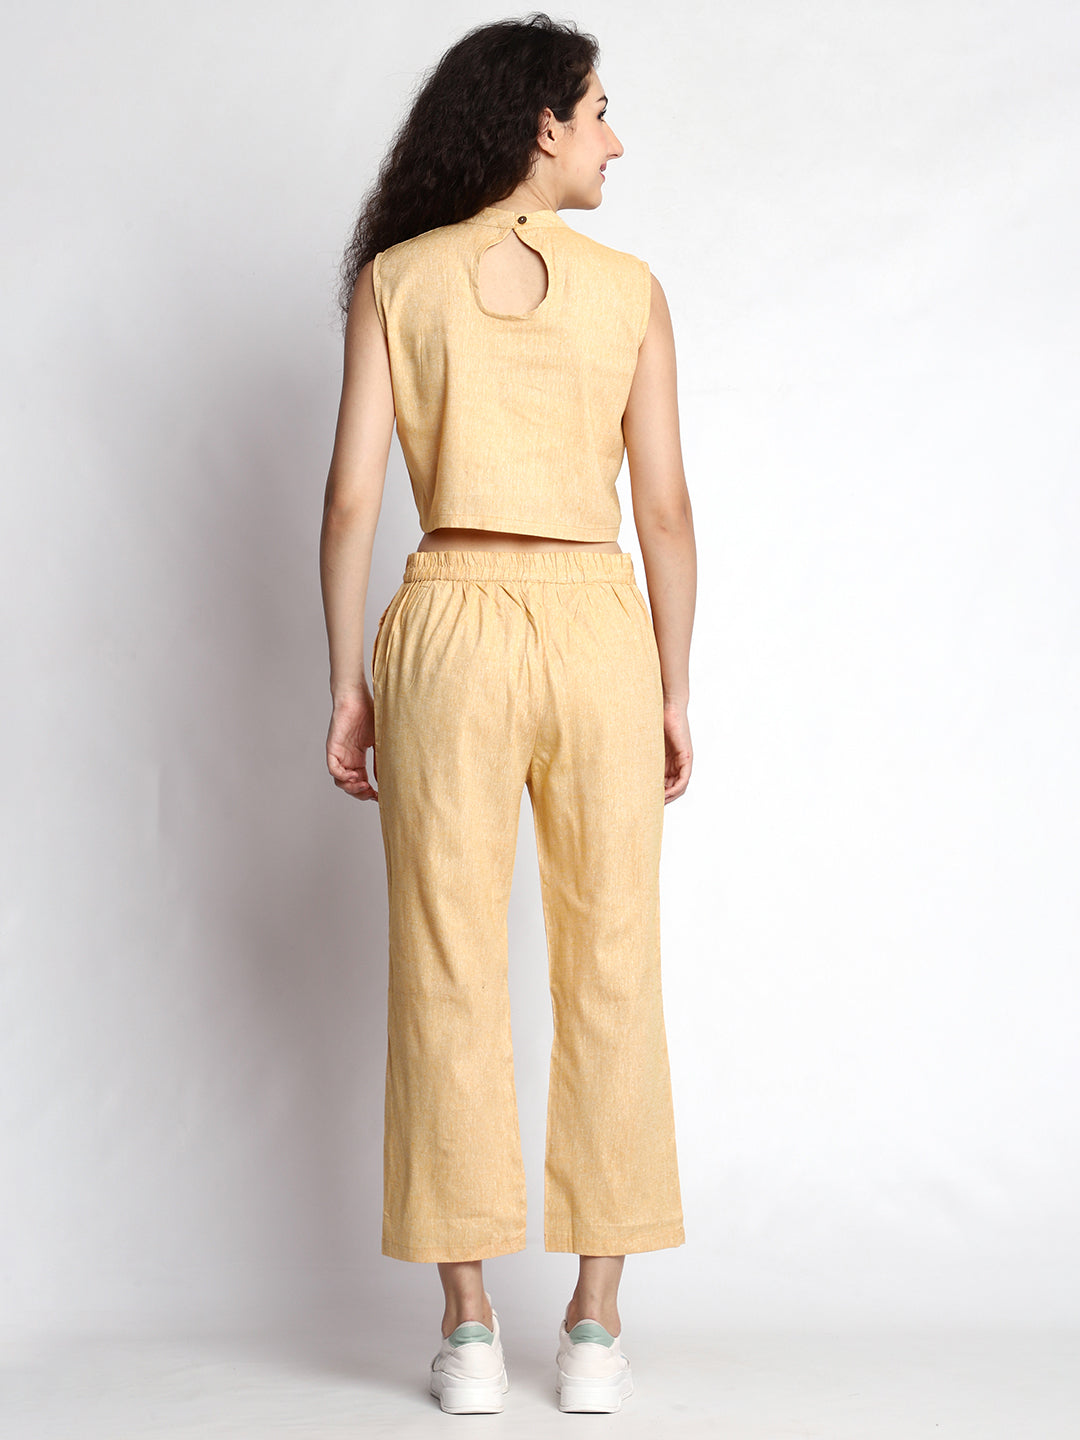 Yellow Chic Sleeveless Crop Top Co-ord Set